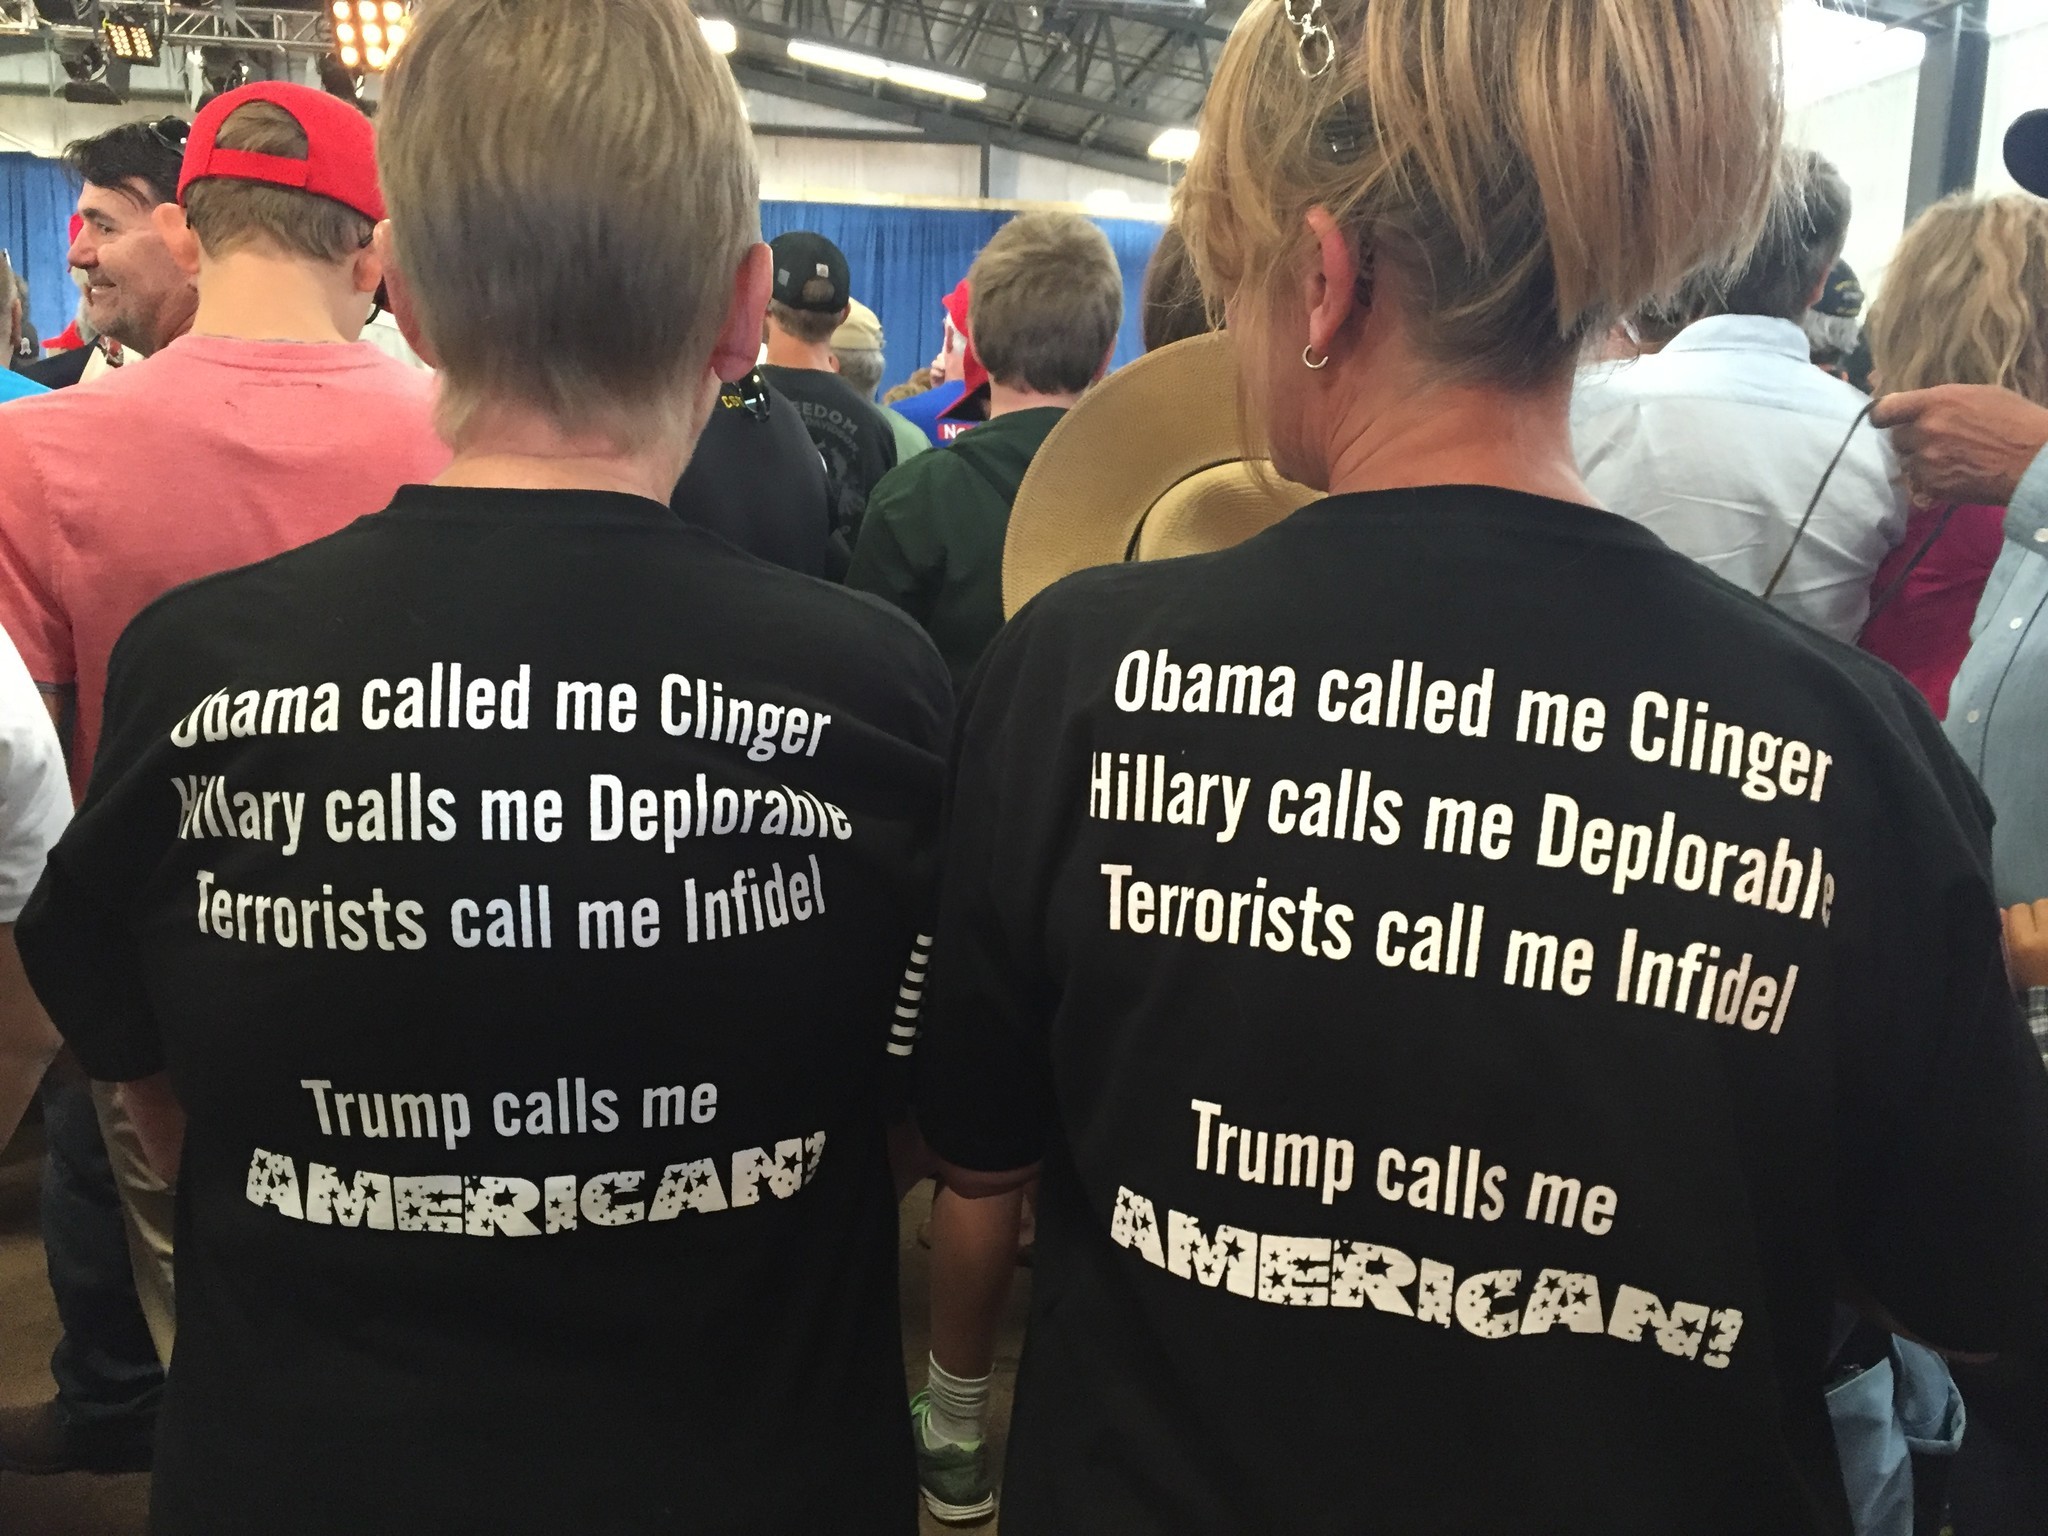 Neighbors Kathy Smith and Tina Griffiths wear matching Trump T-shirts at a rally in Colorado.